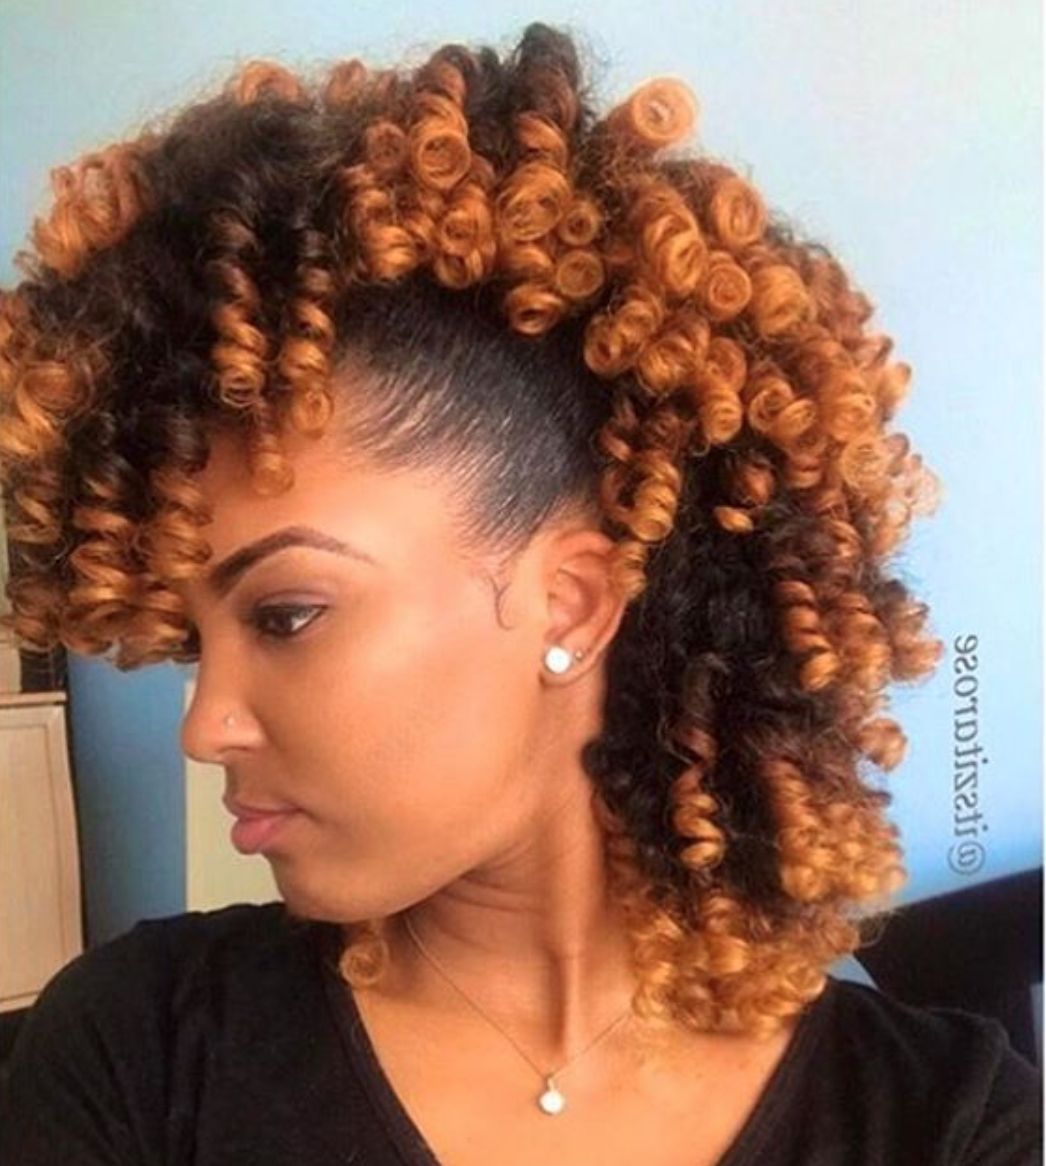 Natural Hair Styles, Braided Mohawk Hairstyles With Regard To 2019 Braided Frohawk Hairstyles (View 3 of 20)